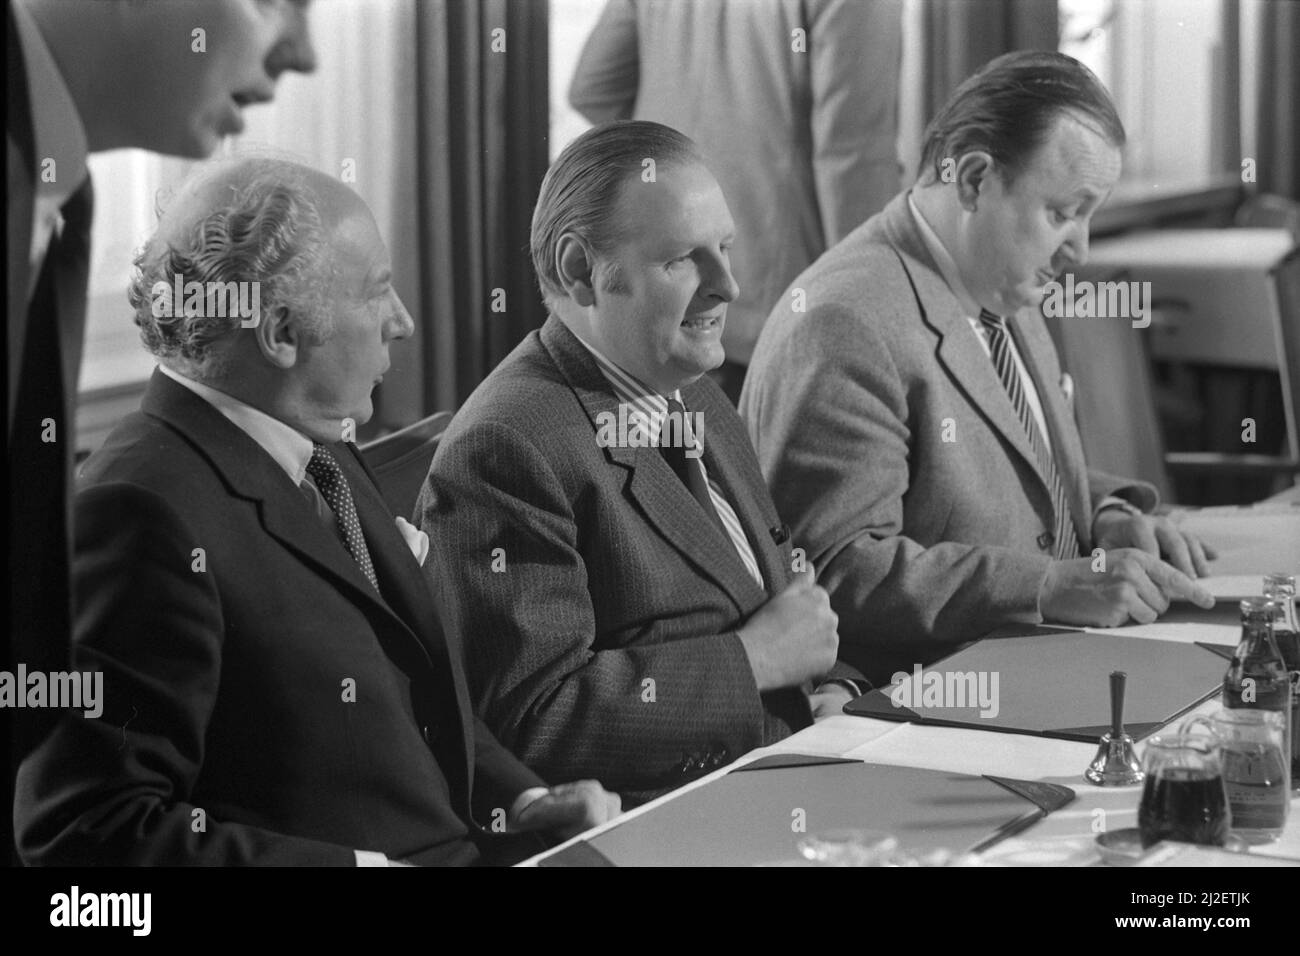 from left: FDP chairman Walter SCHEEL, general secretary Karl-Hermann FLACH and deputy party chairman Hans-Dietrich GENSCHER (all FDP) sit next to each other at a table, black and white, black and white, black and white, monochrome, SW monochrome, black and white photo, December 12 .1972. Stock Photo